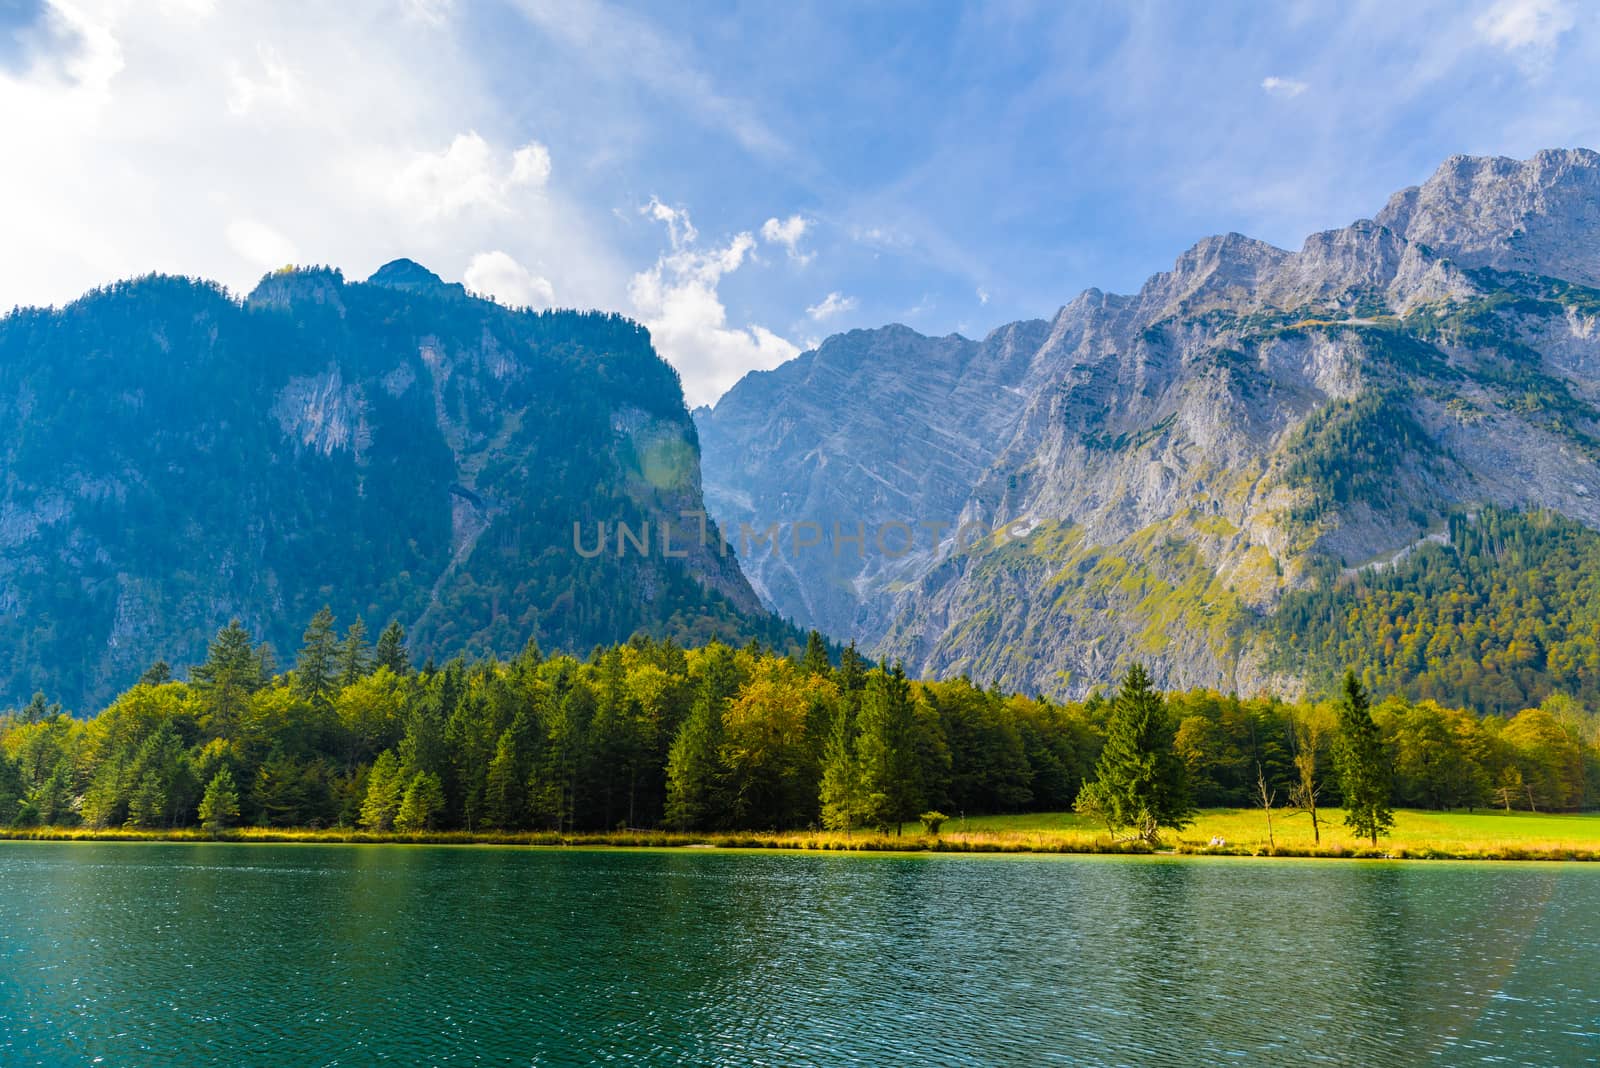 Koenigssee lake with Alp mountains, Konigsee, Berchtesgaden National Park, Bavaria, Germany by Eagle2308